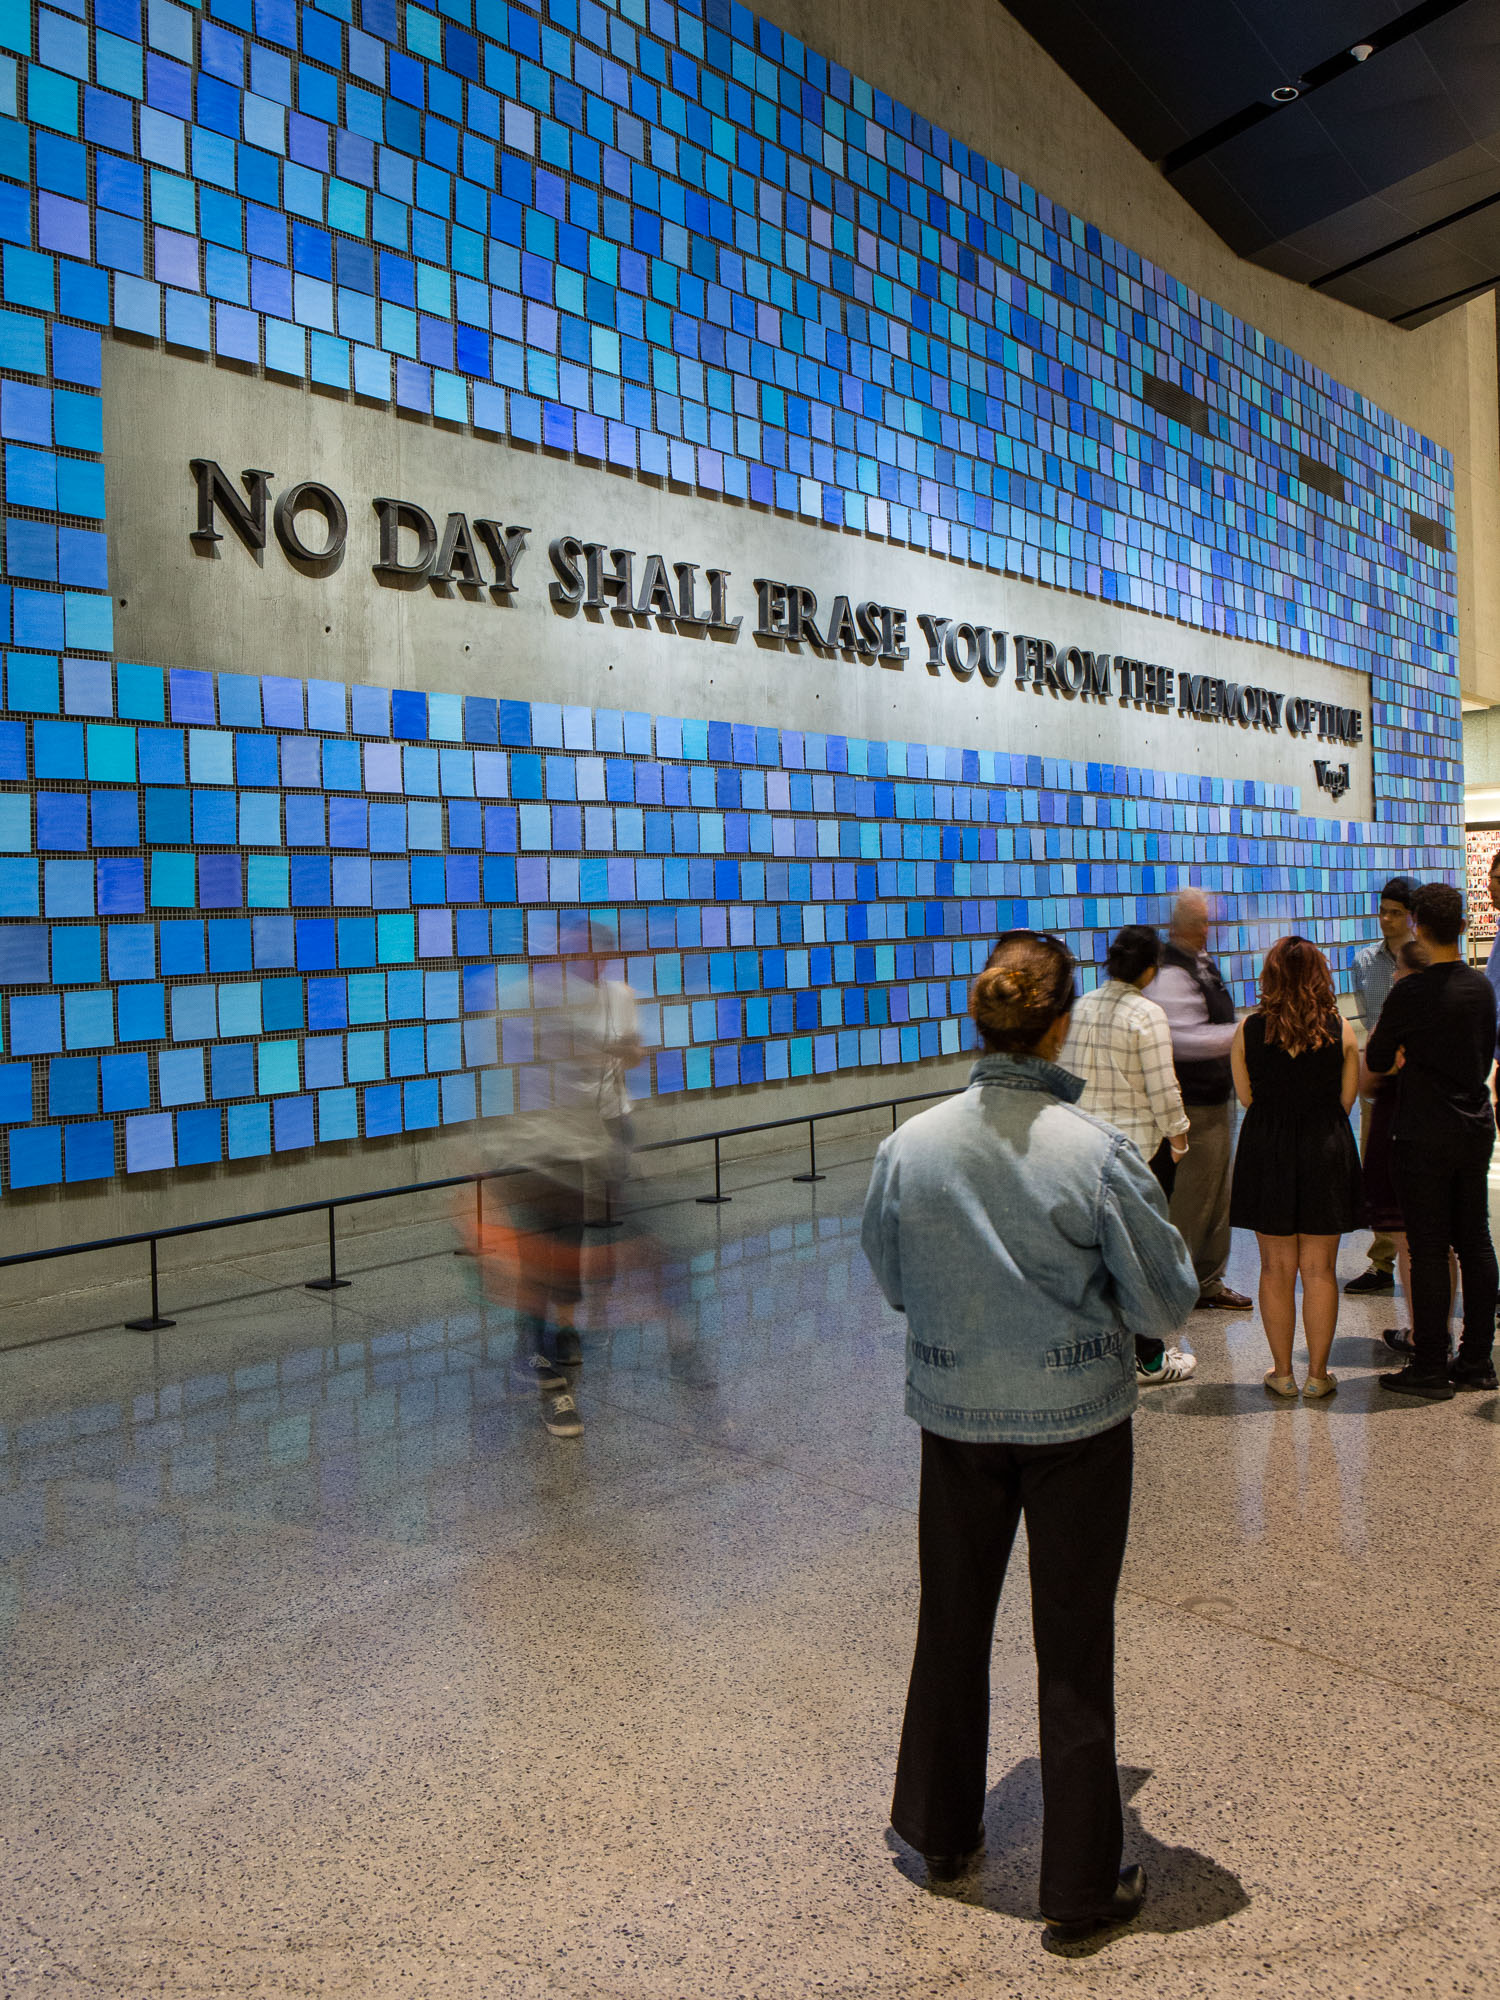 Details of an installation by Spencer Finch, entitled "Trying to remember the color of the sky on that September morning", in the 9/11 Museum.